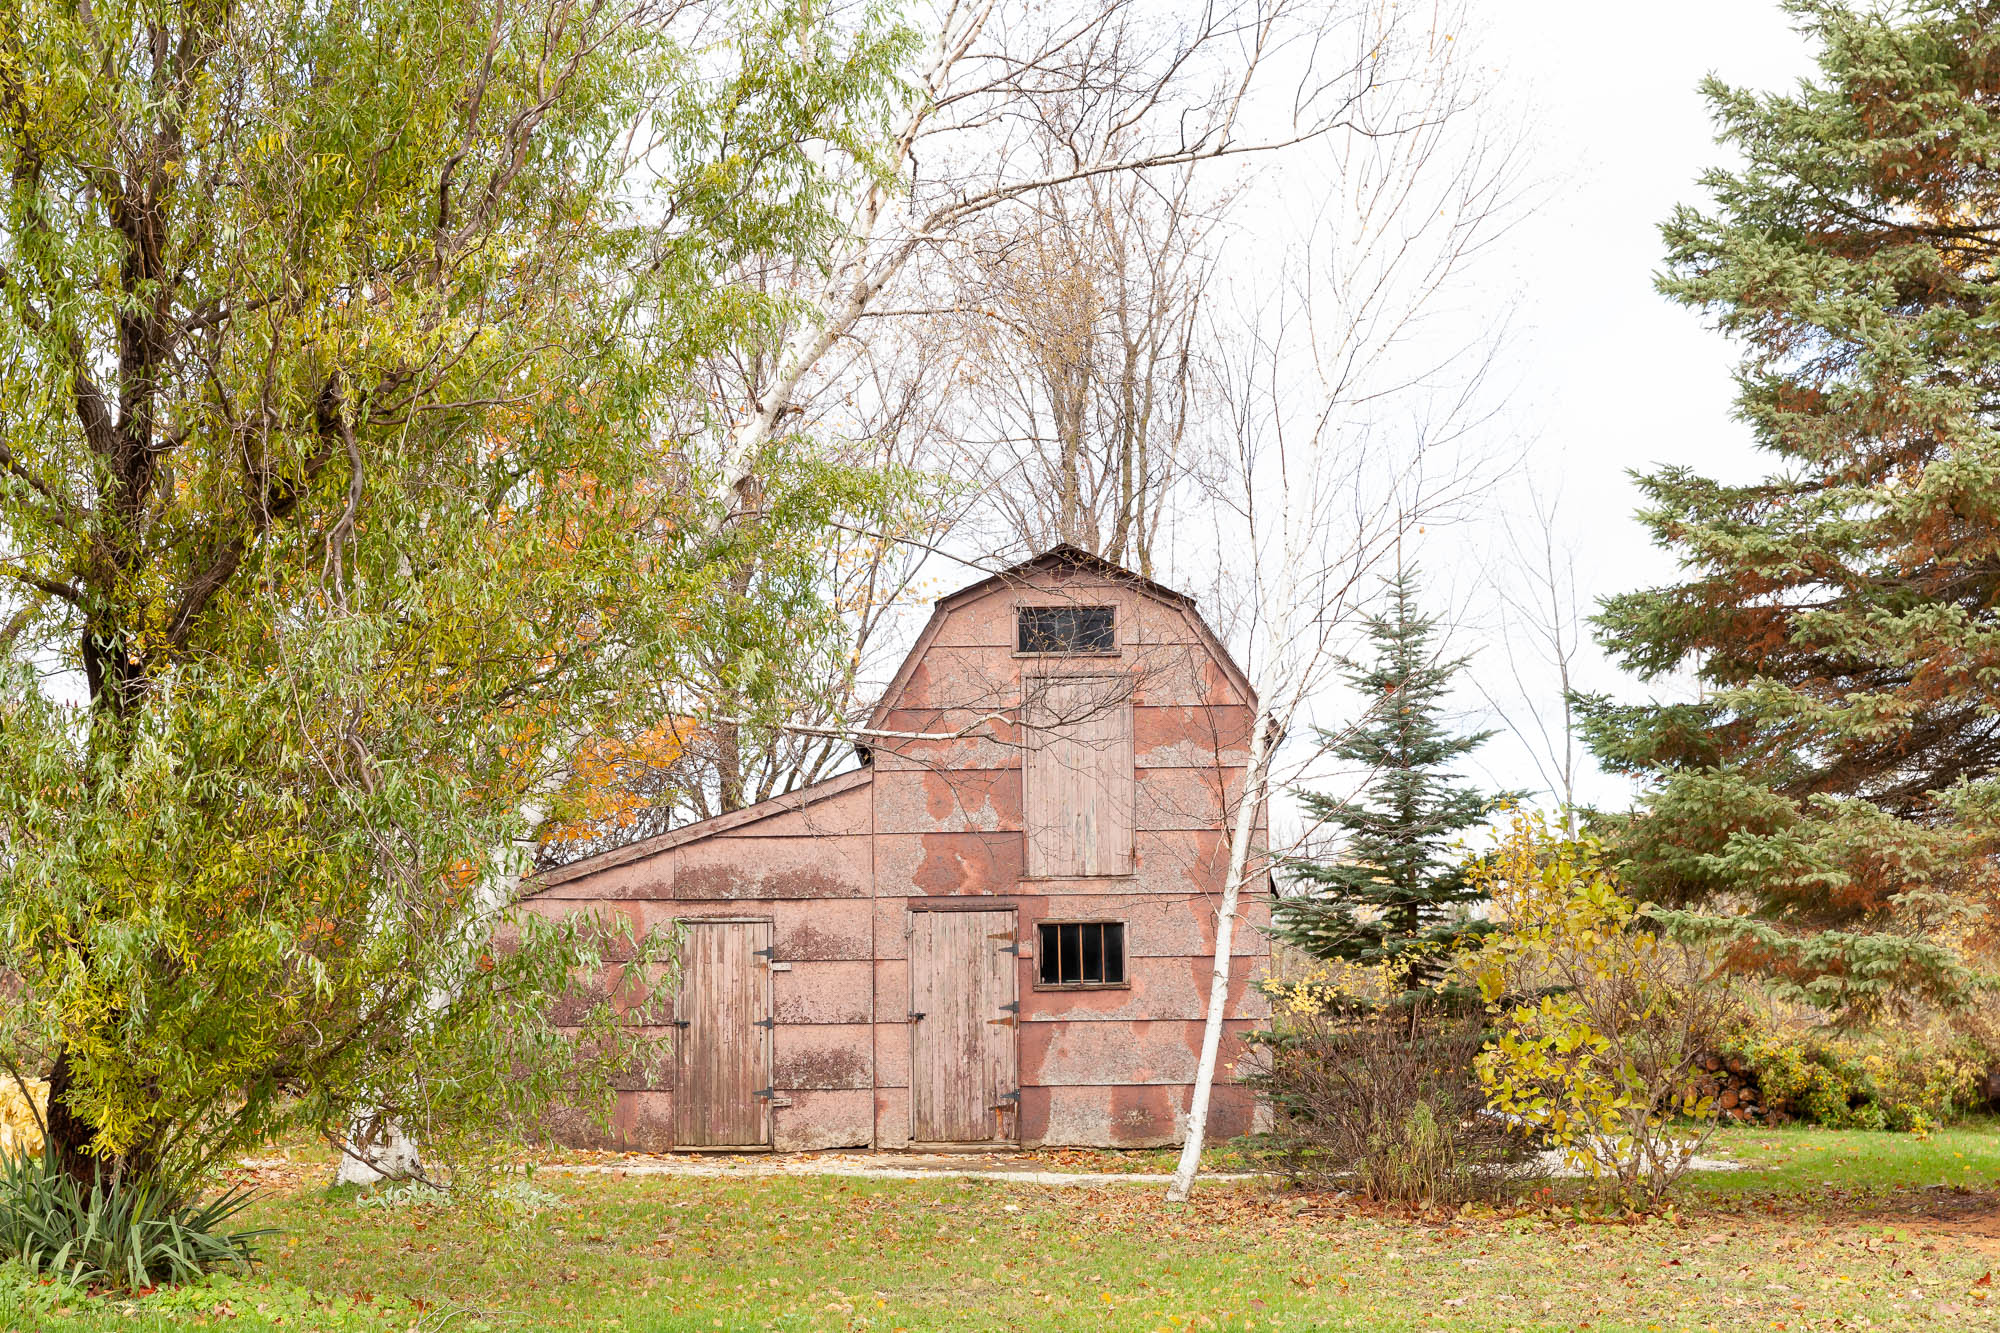 Red barn on property in Collingwood, Ontario